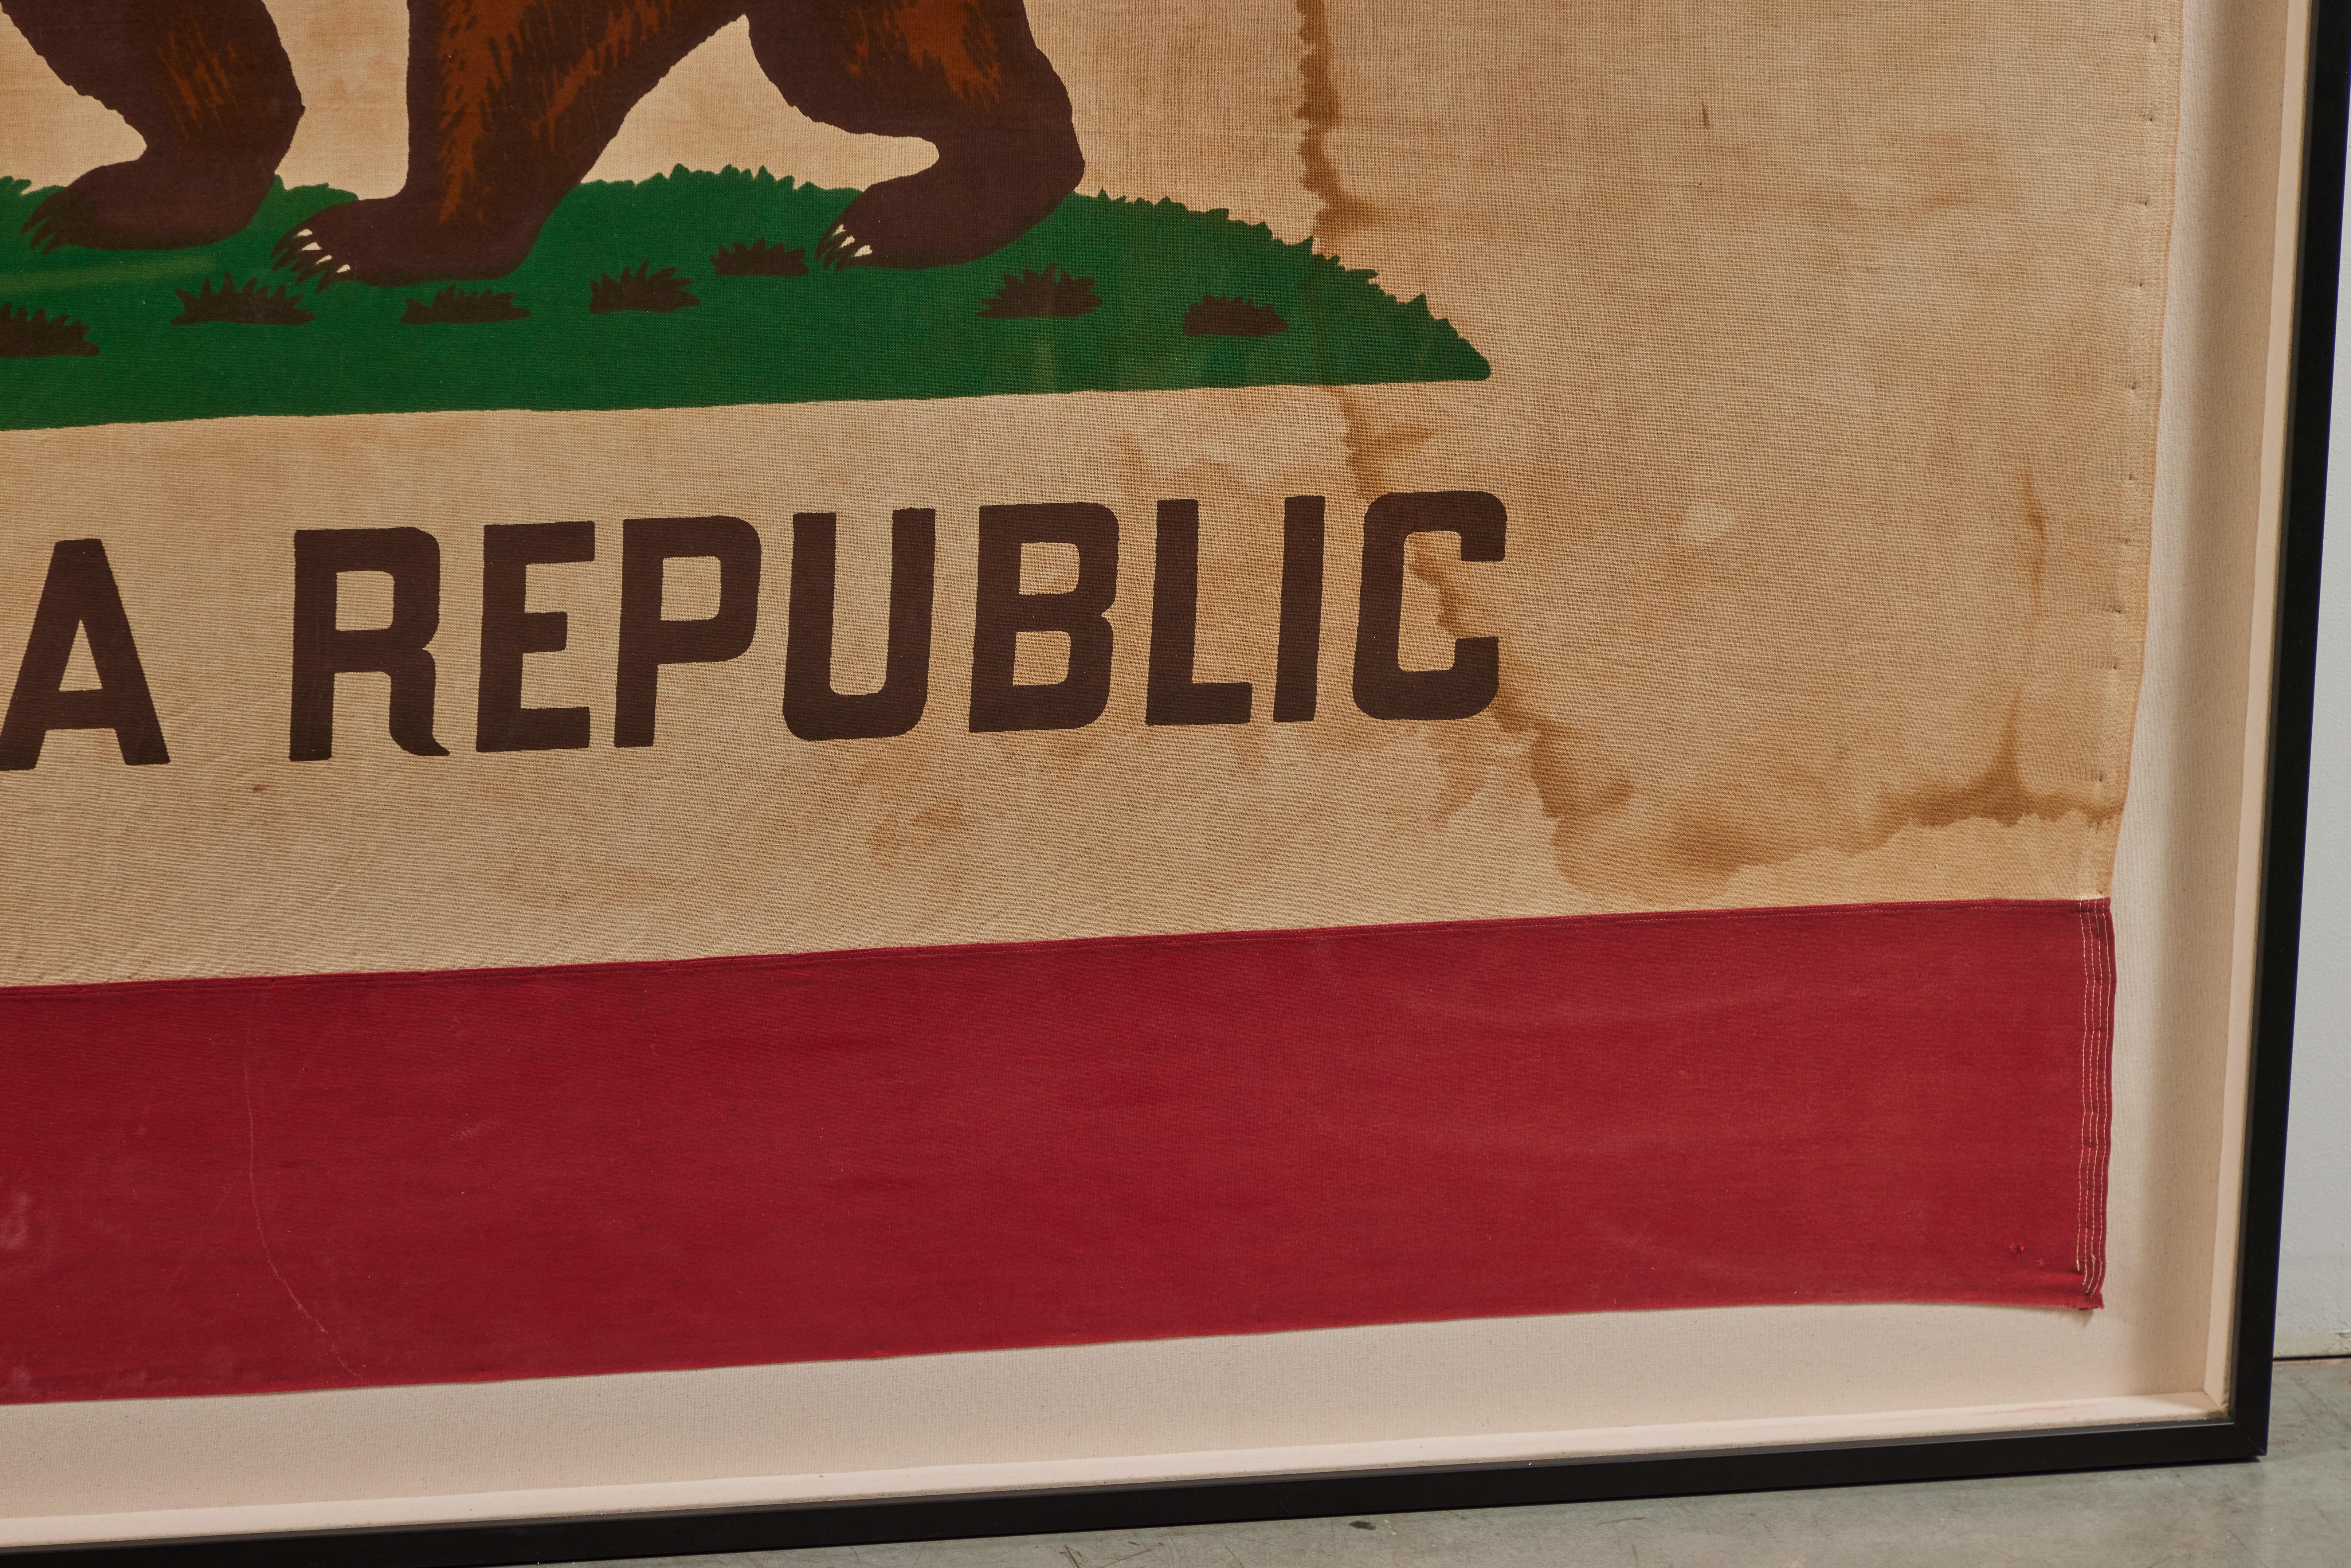 why is there a bear on the california flag